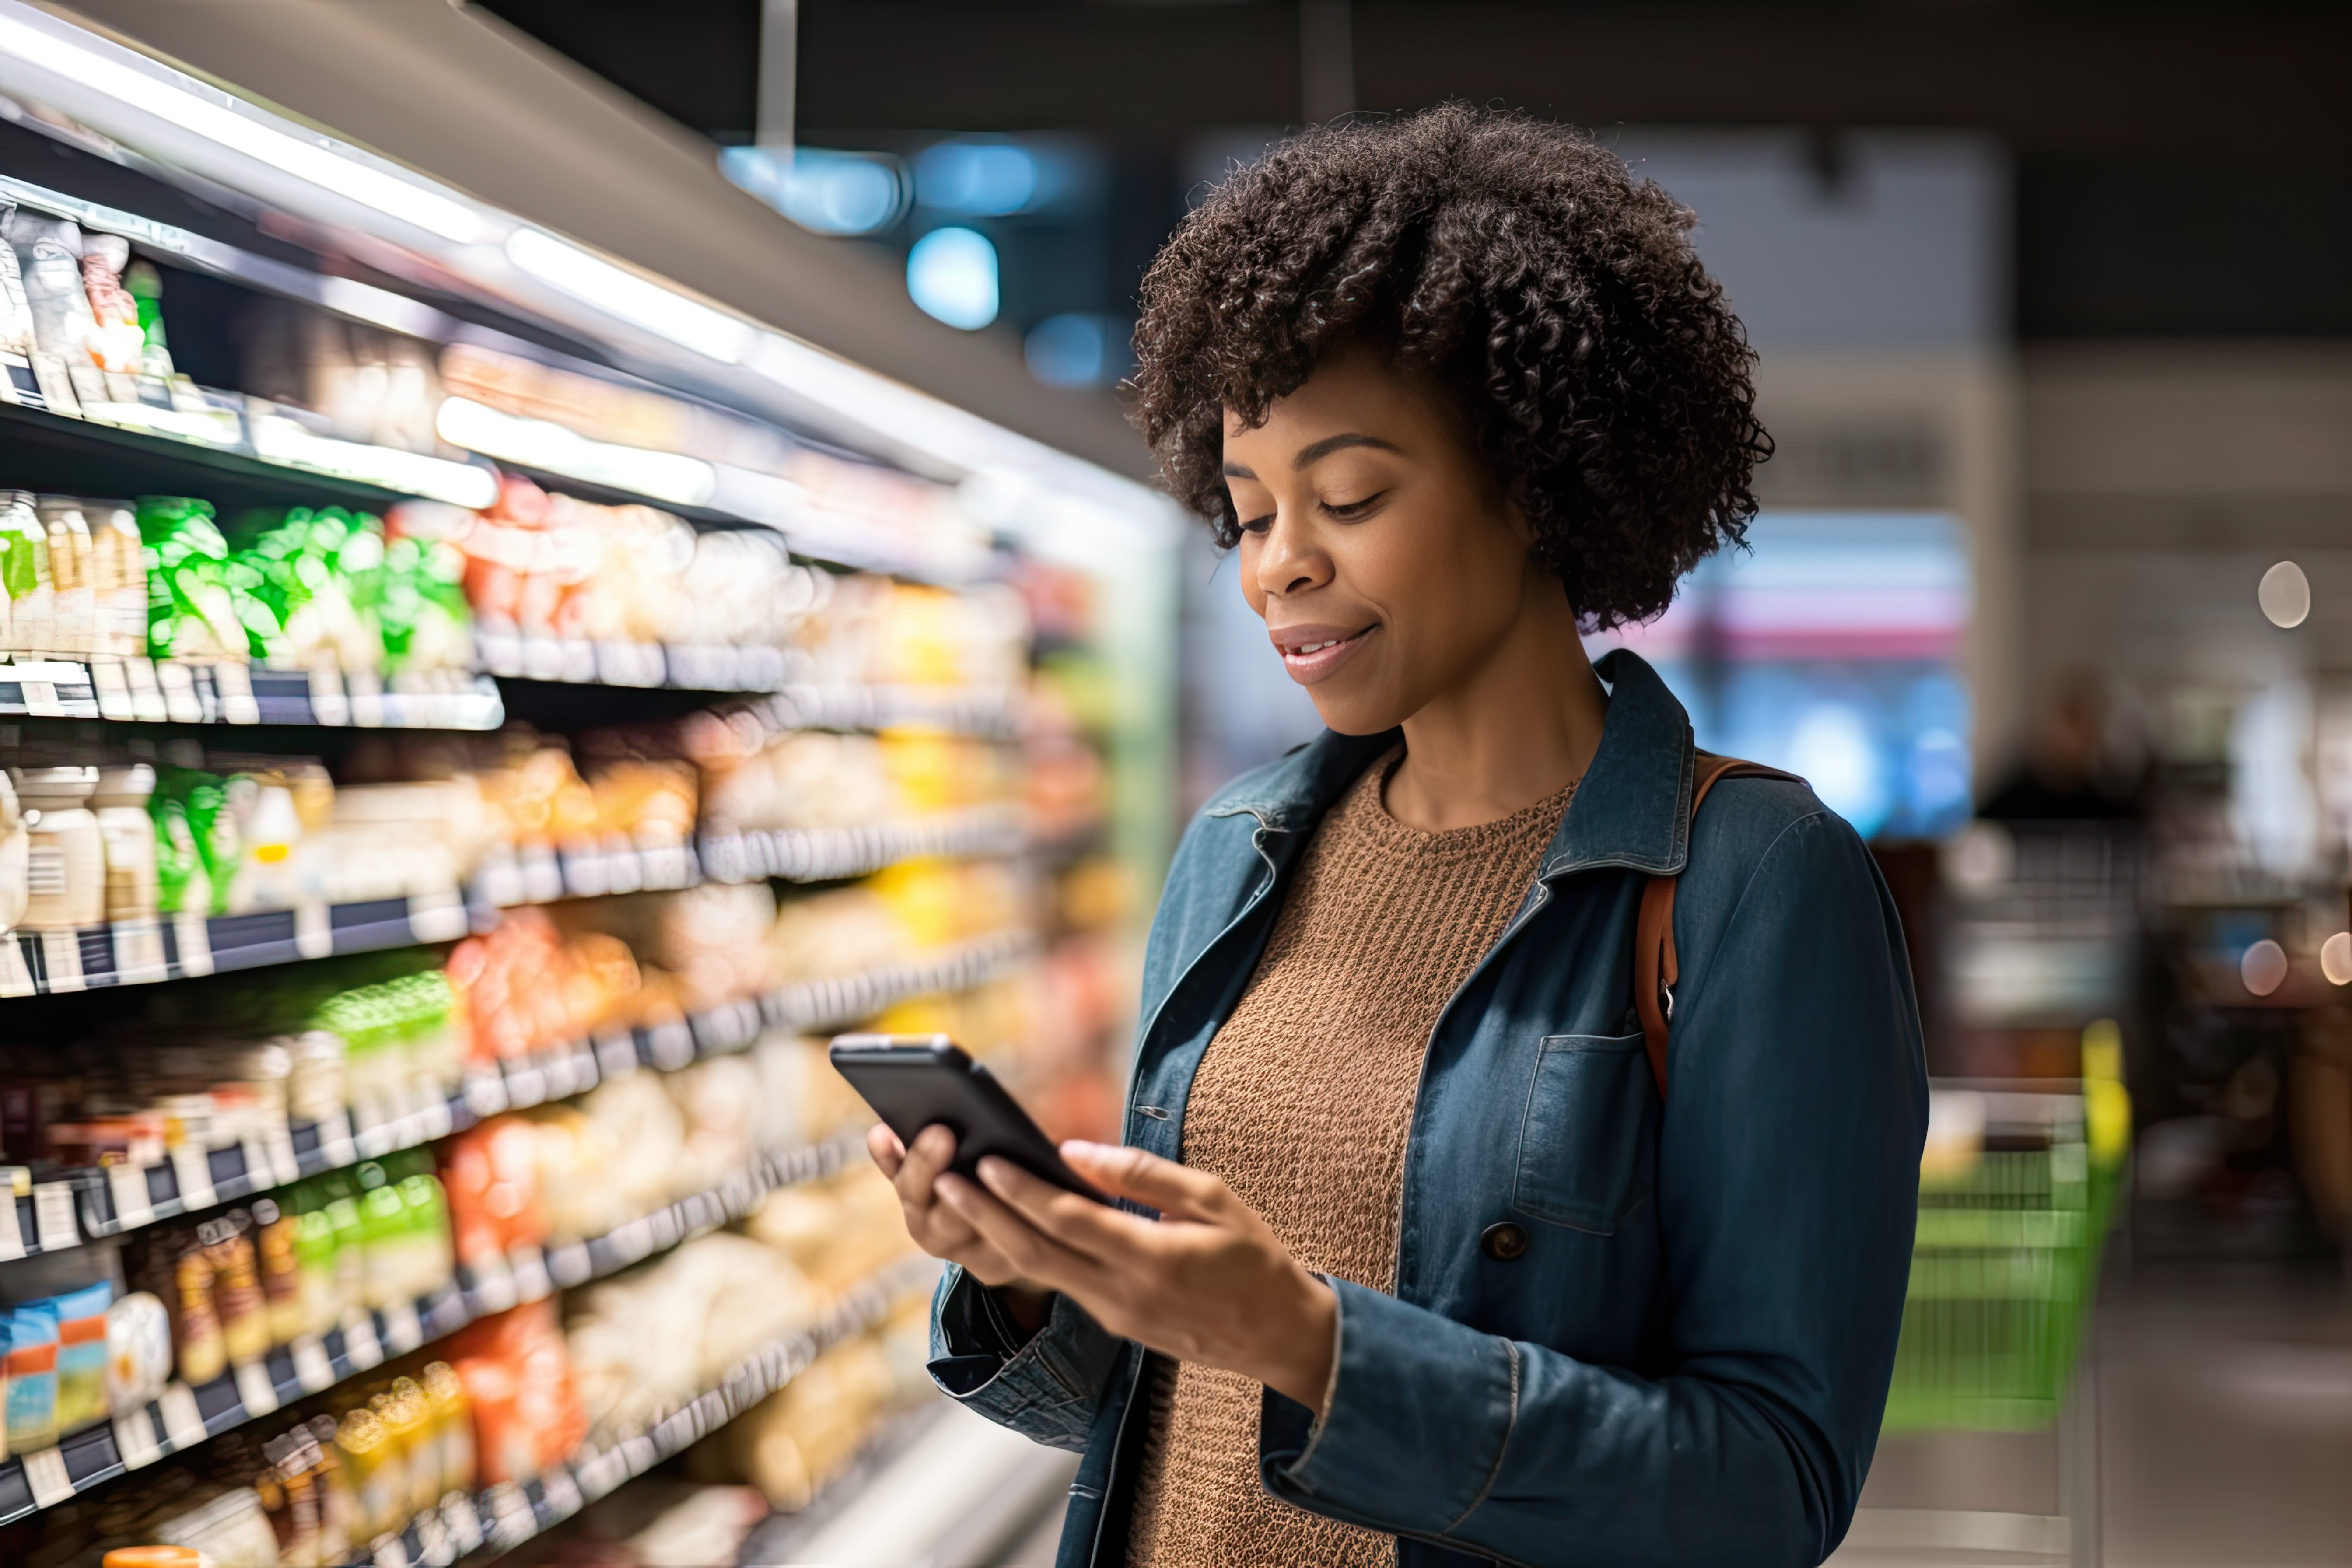 A person stands in a grocery store aisle, looking at their smartphone while holding it with both hands. Shelves stocked with various products are visible in the background.